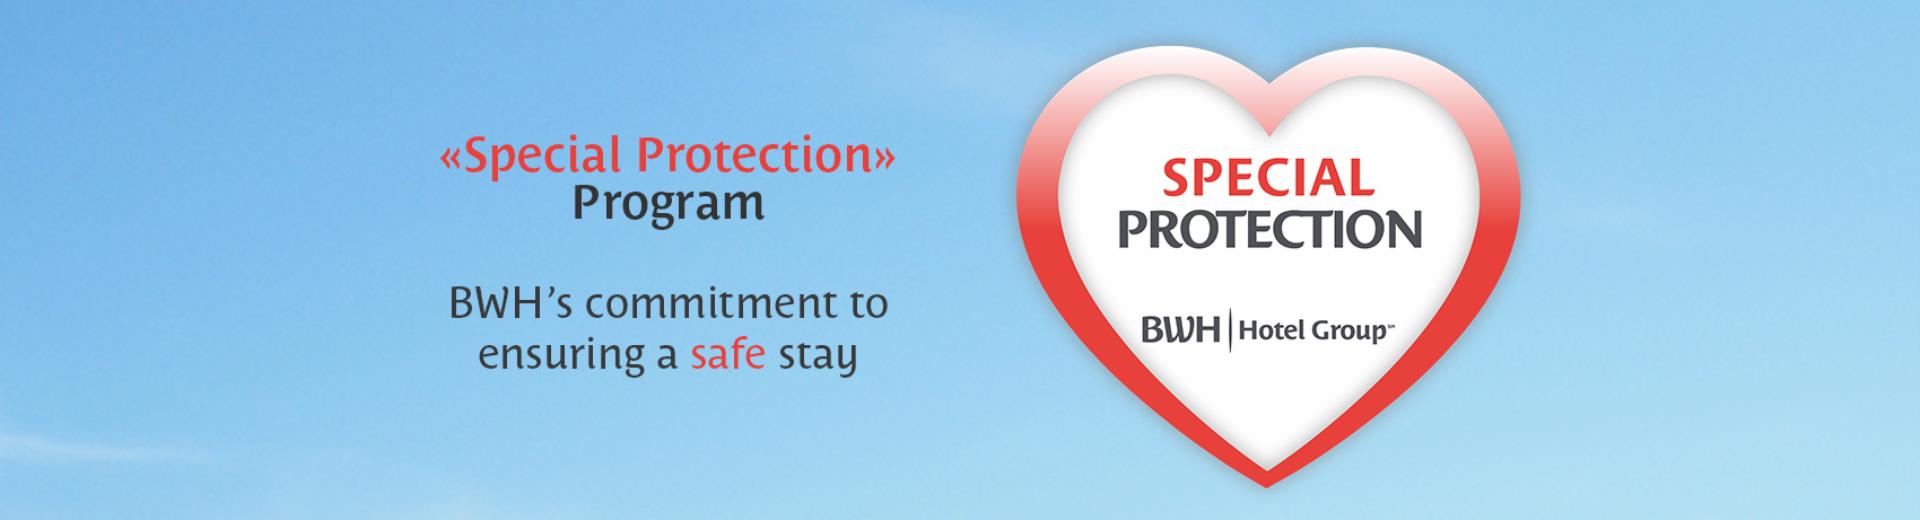 Special Protection - BW Plus Tower Hotel Bologna